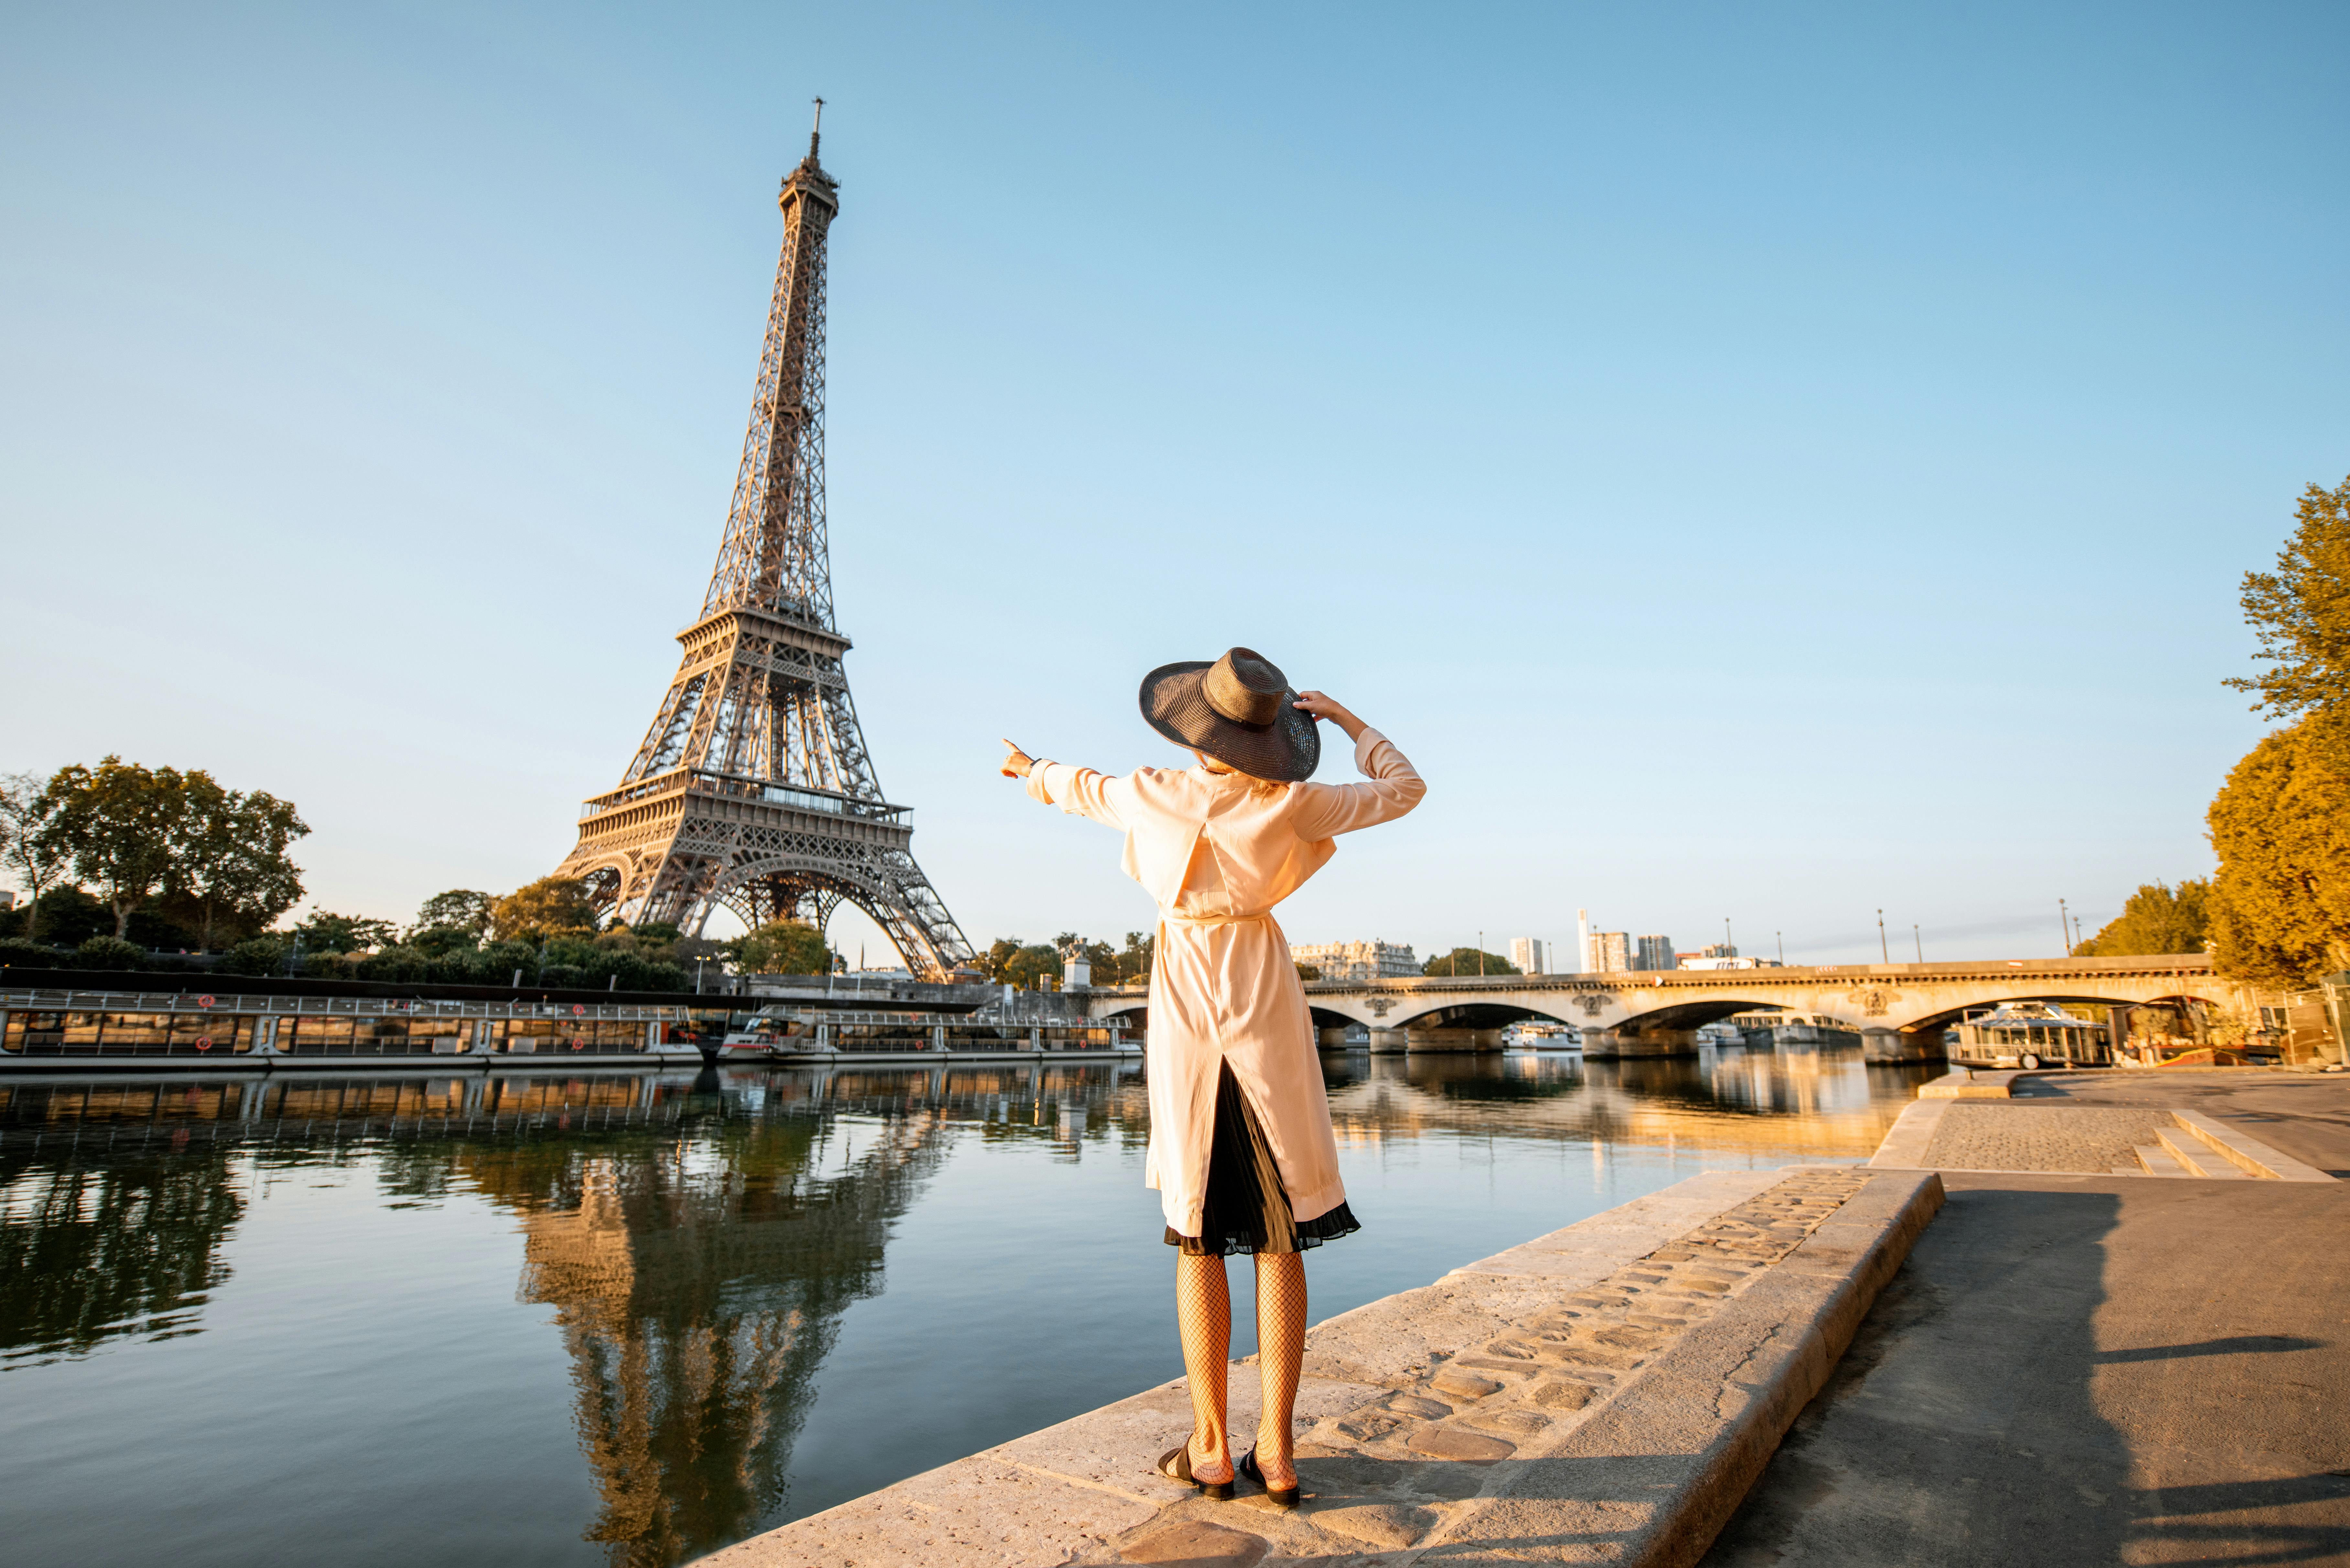 Audioguided tour of the Eiffel Tower with cruise ticket